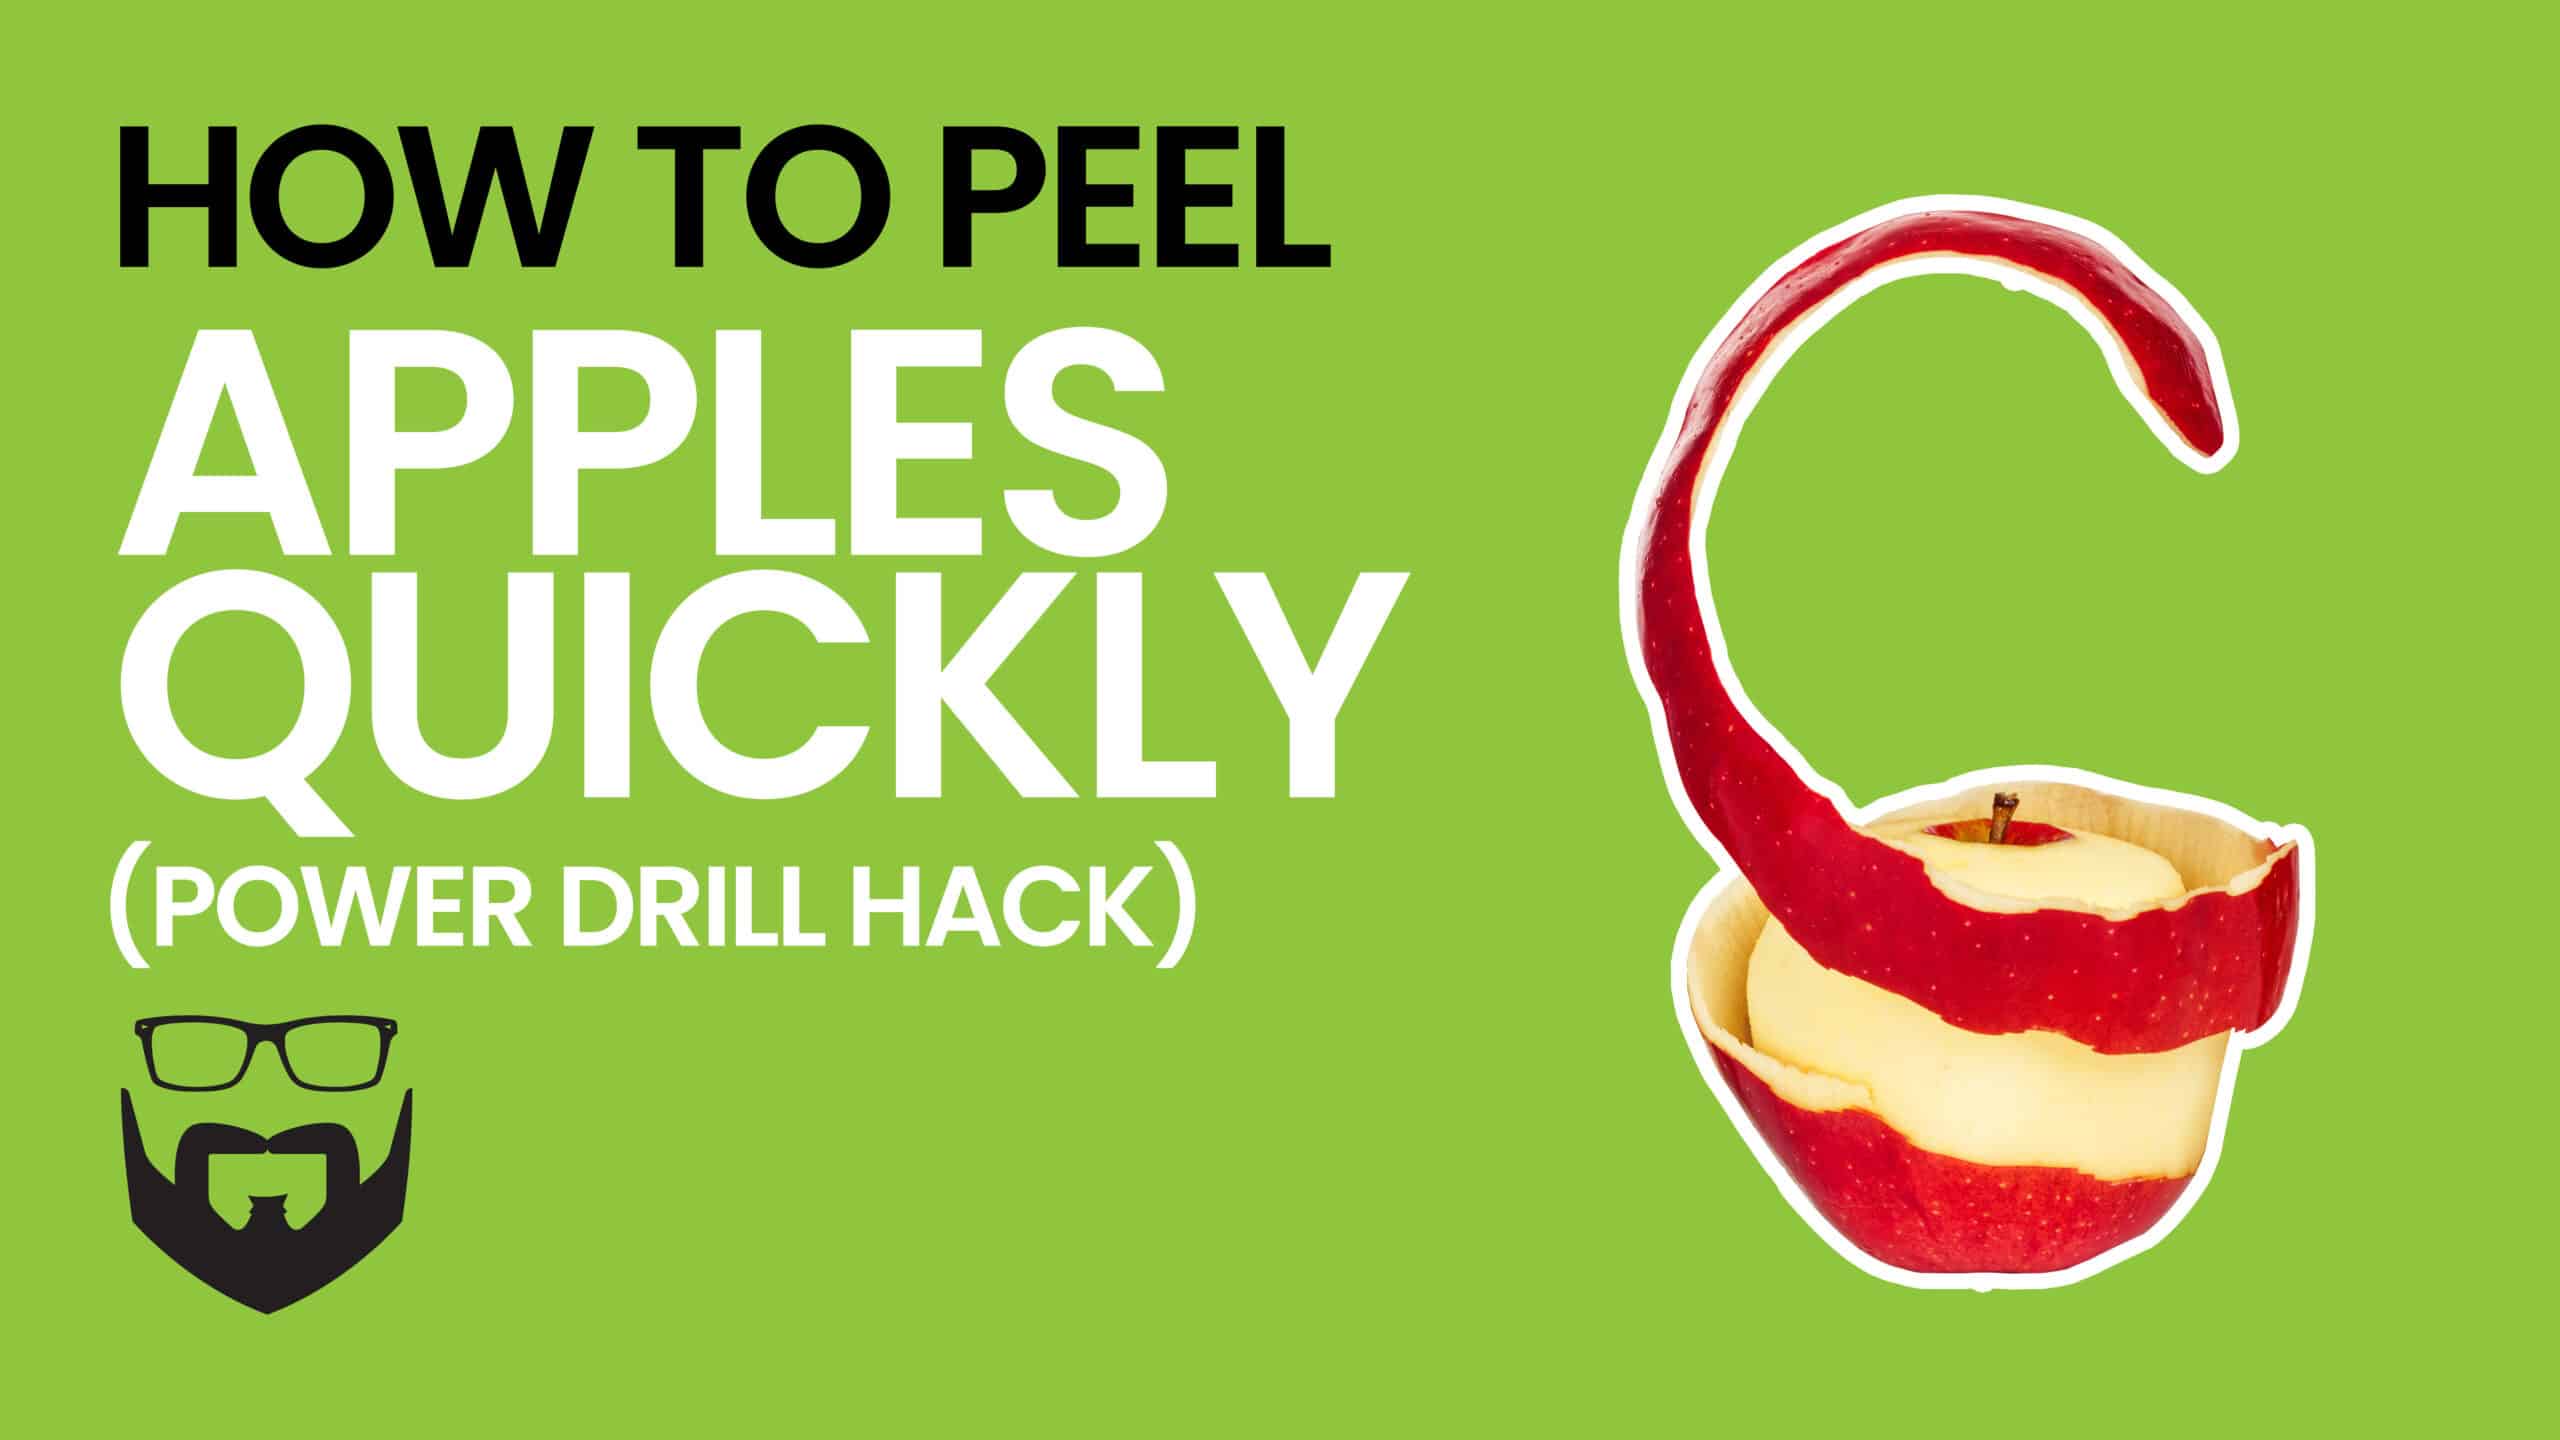 How to Peel Apples Quickly (Power Drill Hack) Video - Green